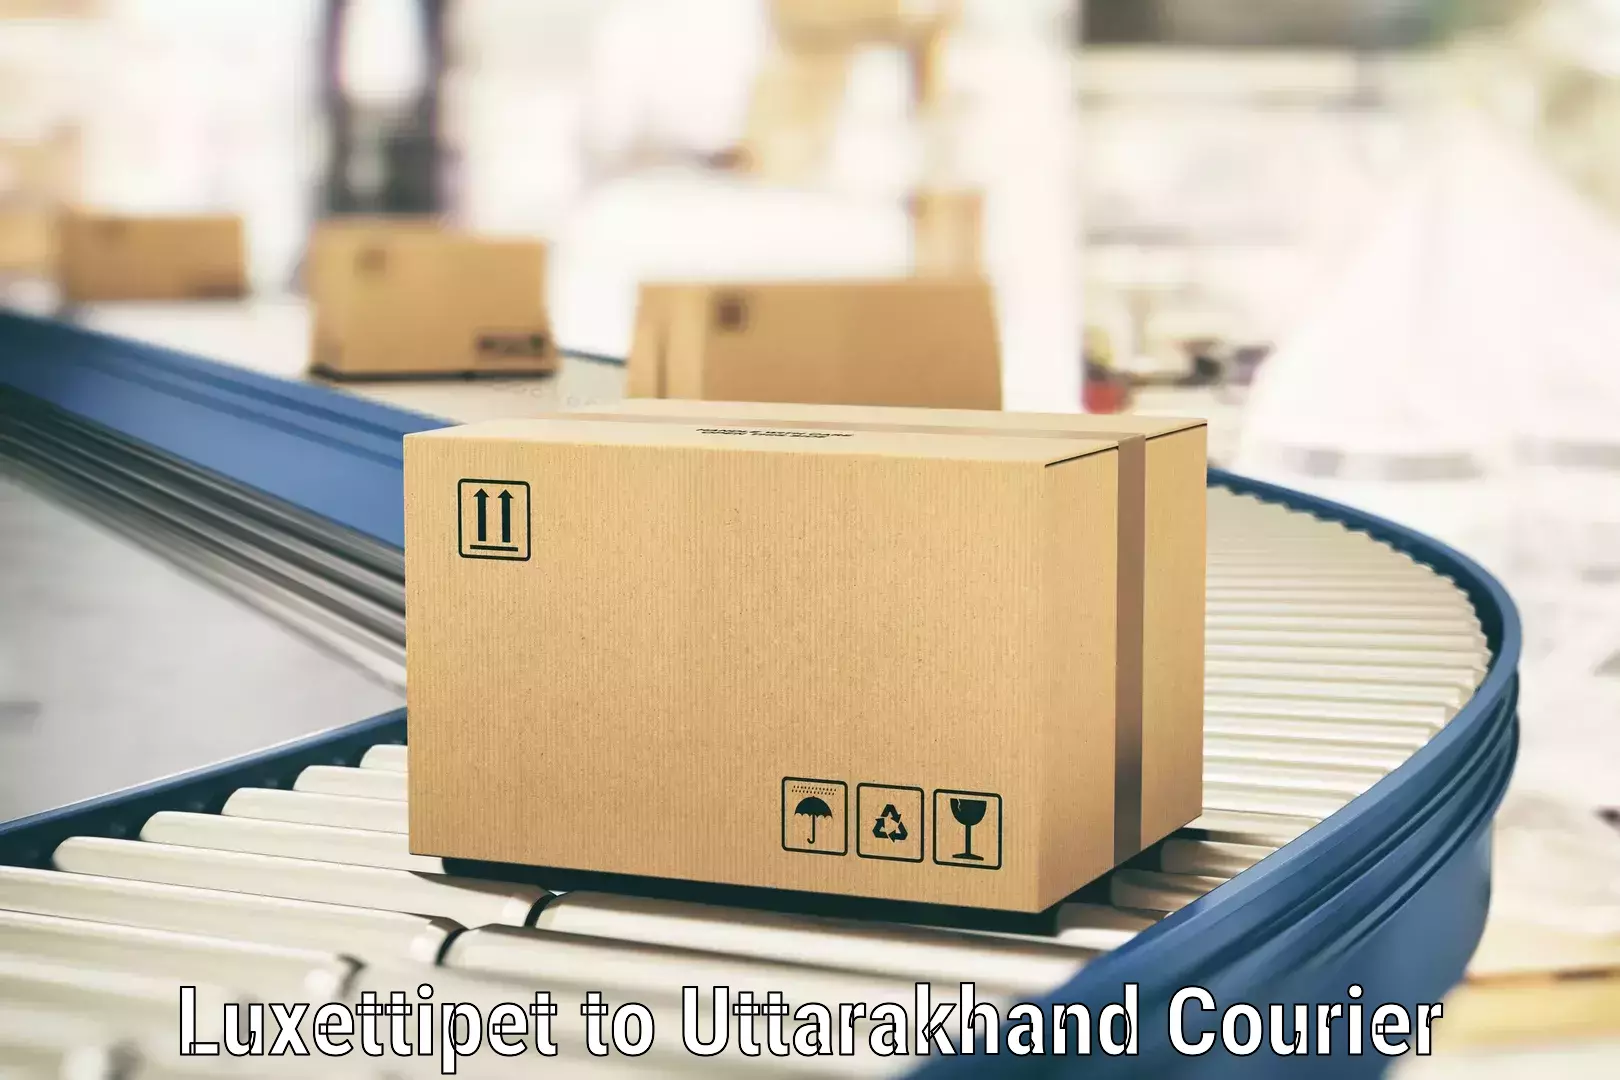 Express package handling Luxettipet to Udham Singh Nagar